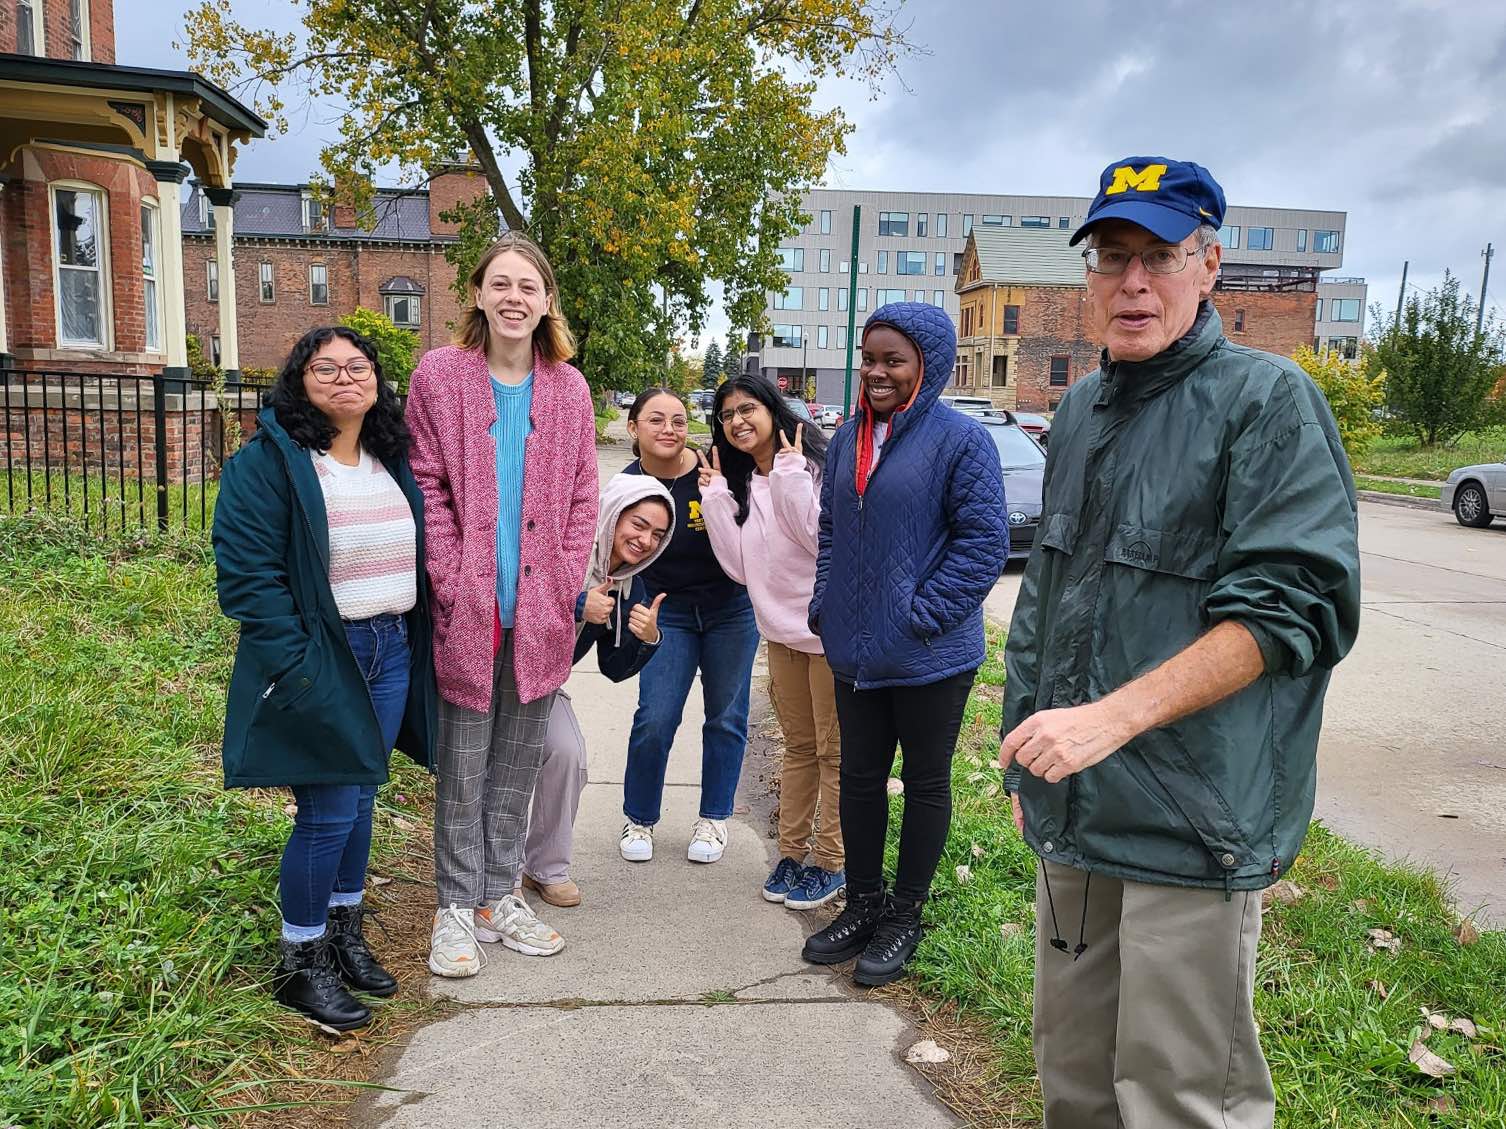 UM-Dearborn students gather for a photo in a Detroit neighborhood